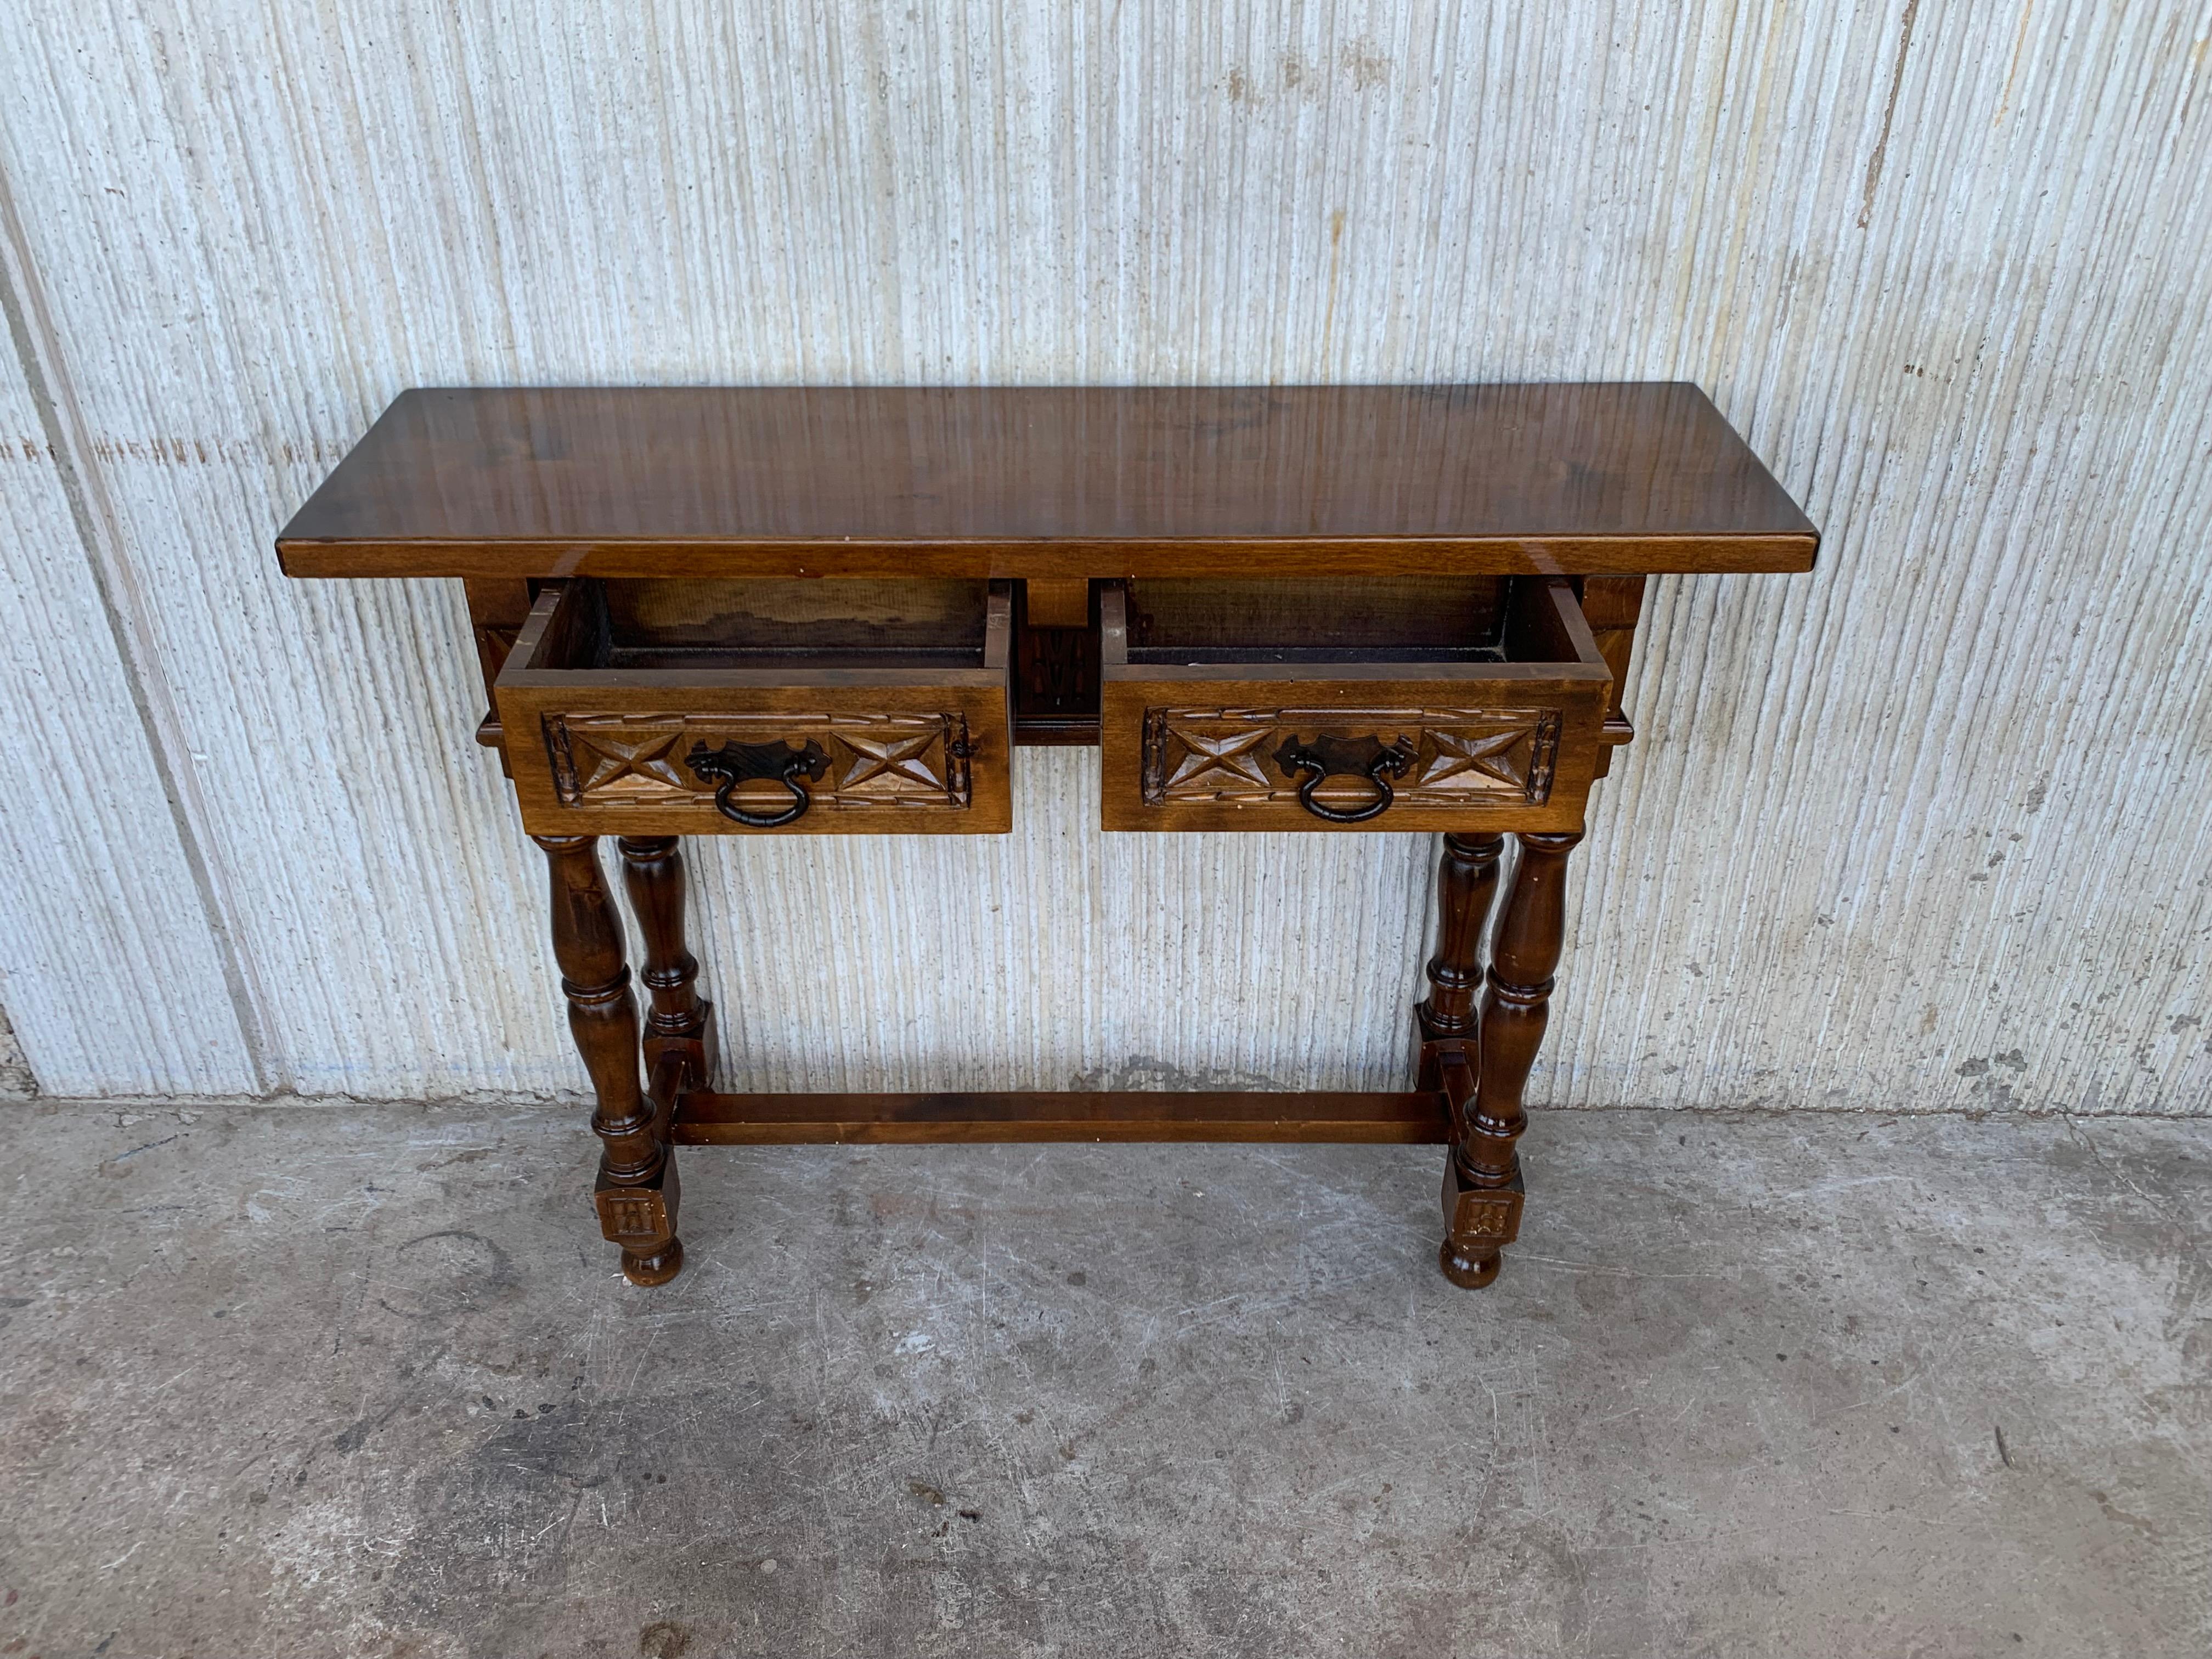 Baroque 20th Century Spanish Tuscan Console Table with Two Drawers and Turned Legs